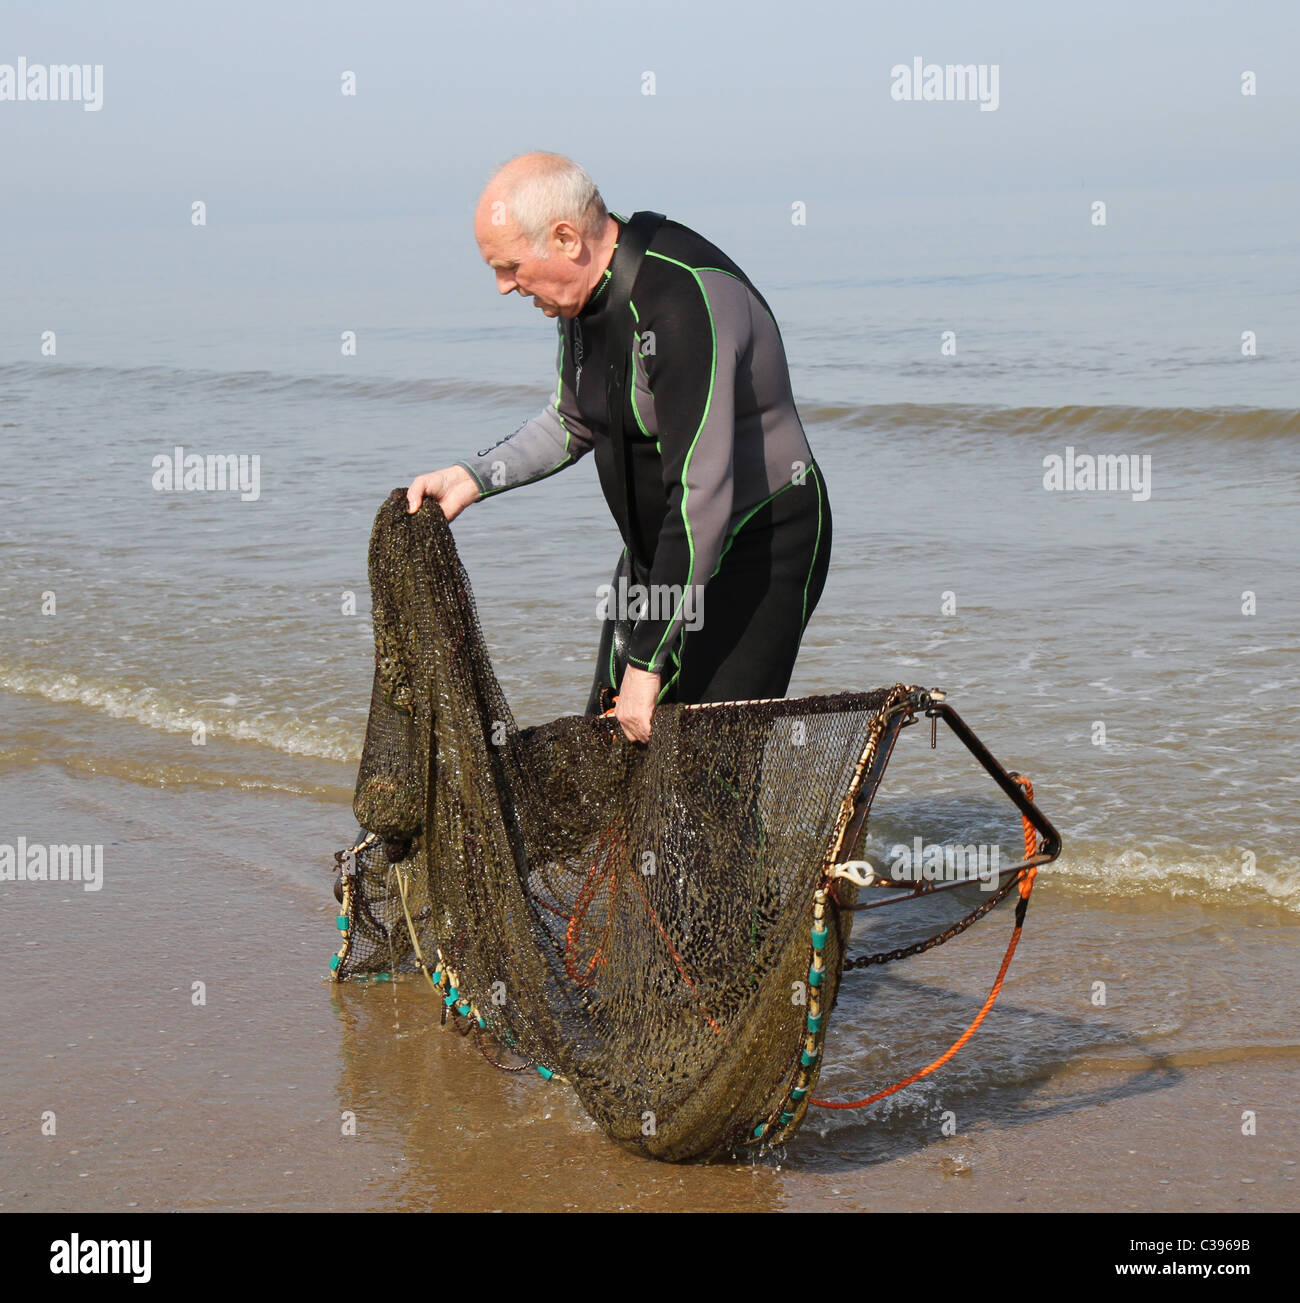 https://c8.alamy.com/comp/C3969B/a-fisherman-catching-shrimp-in-the-north-sea-in-the-old-fashioned-C3969B.jpg